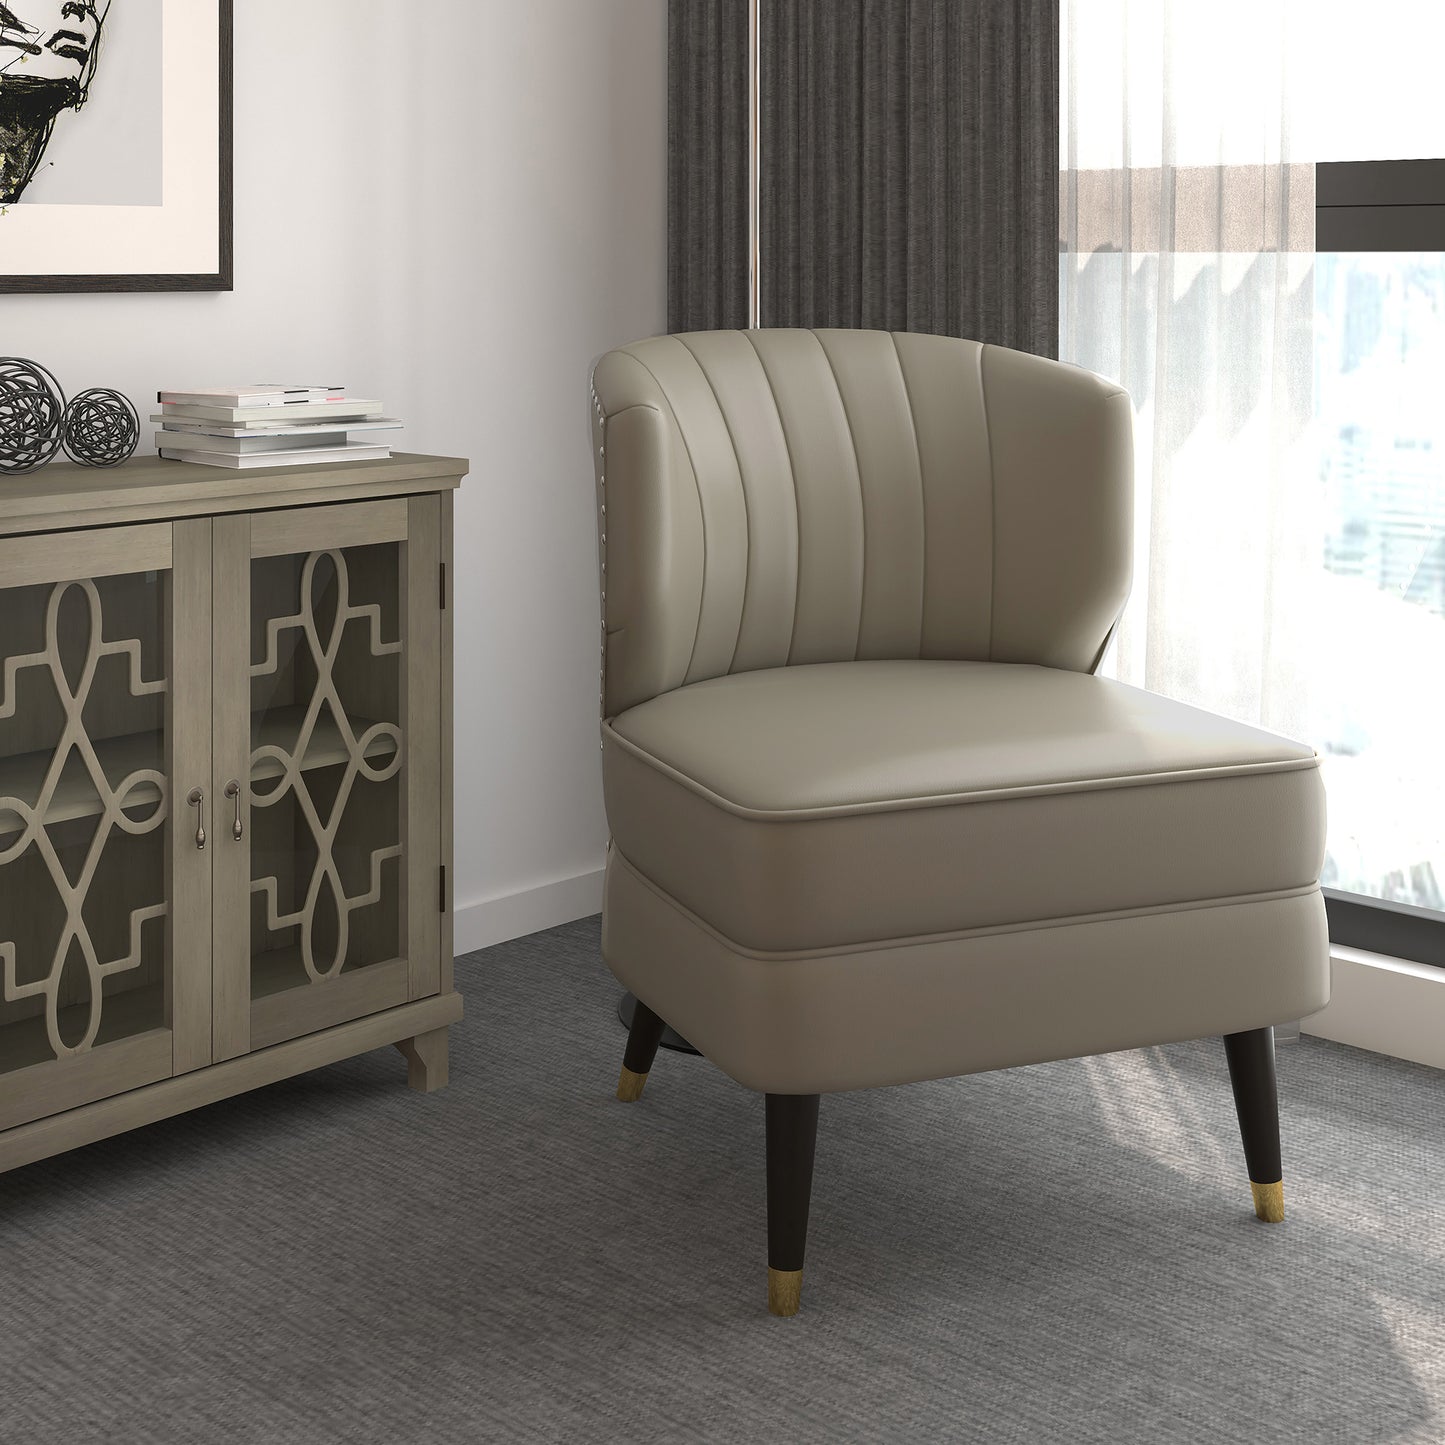 Kyrie Accent Chair in Grey-Beige and Espresso